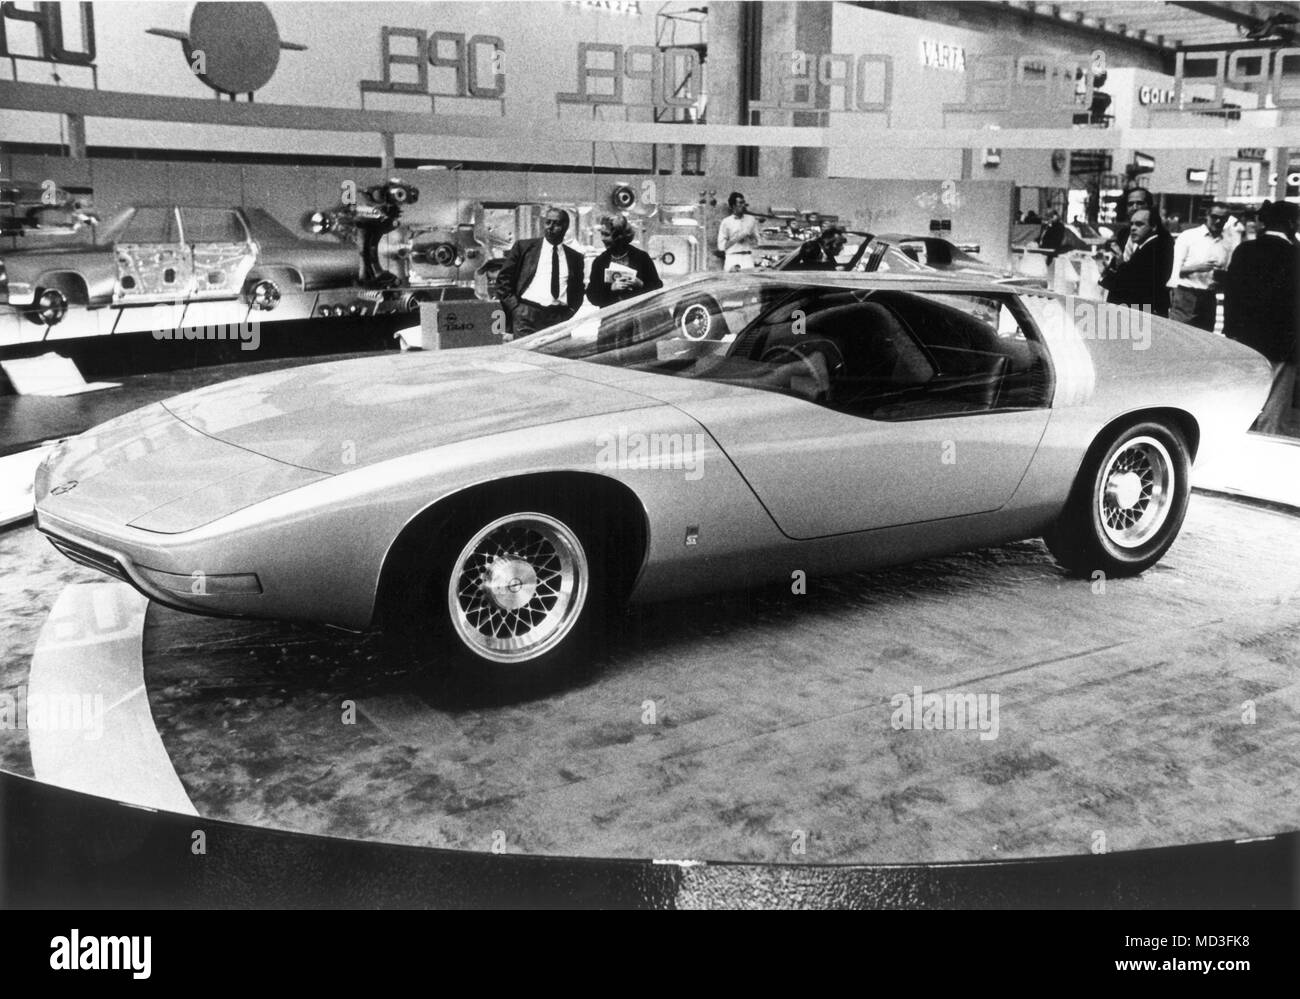 An Opel Diplomat CD at the International Motor Show in Frankfurt am Main,  recorded on 16.09.1969. The futuristic design of the car was designed by  Charles M. Jordan. Photo: Roland Witschel (c)